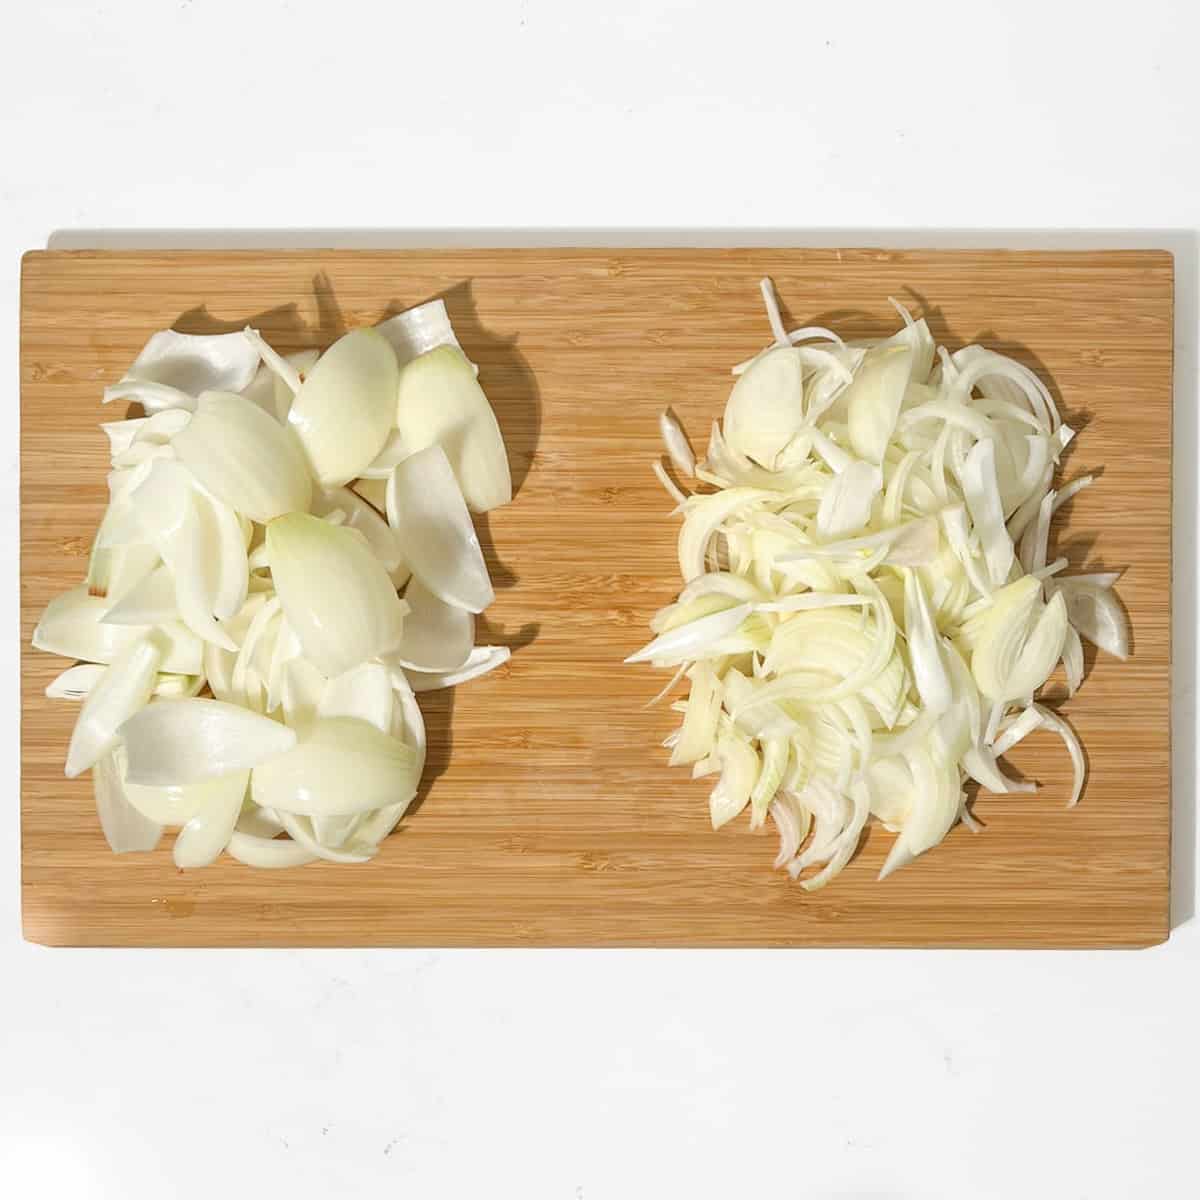 Sliced onions and onion petals in a large wooden chopping board.